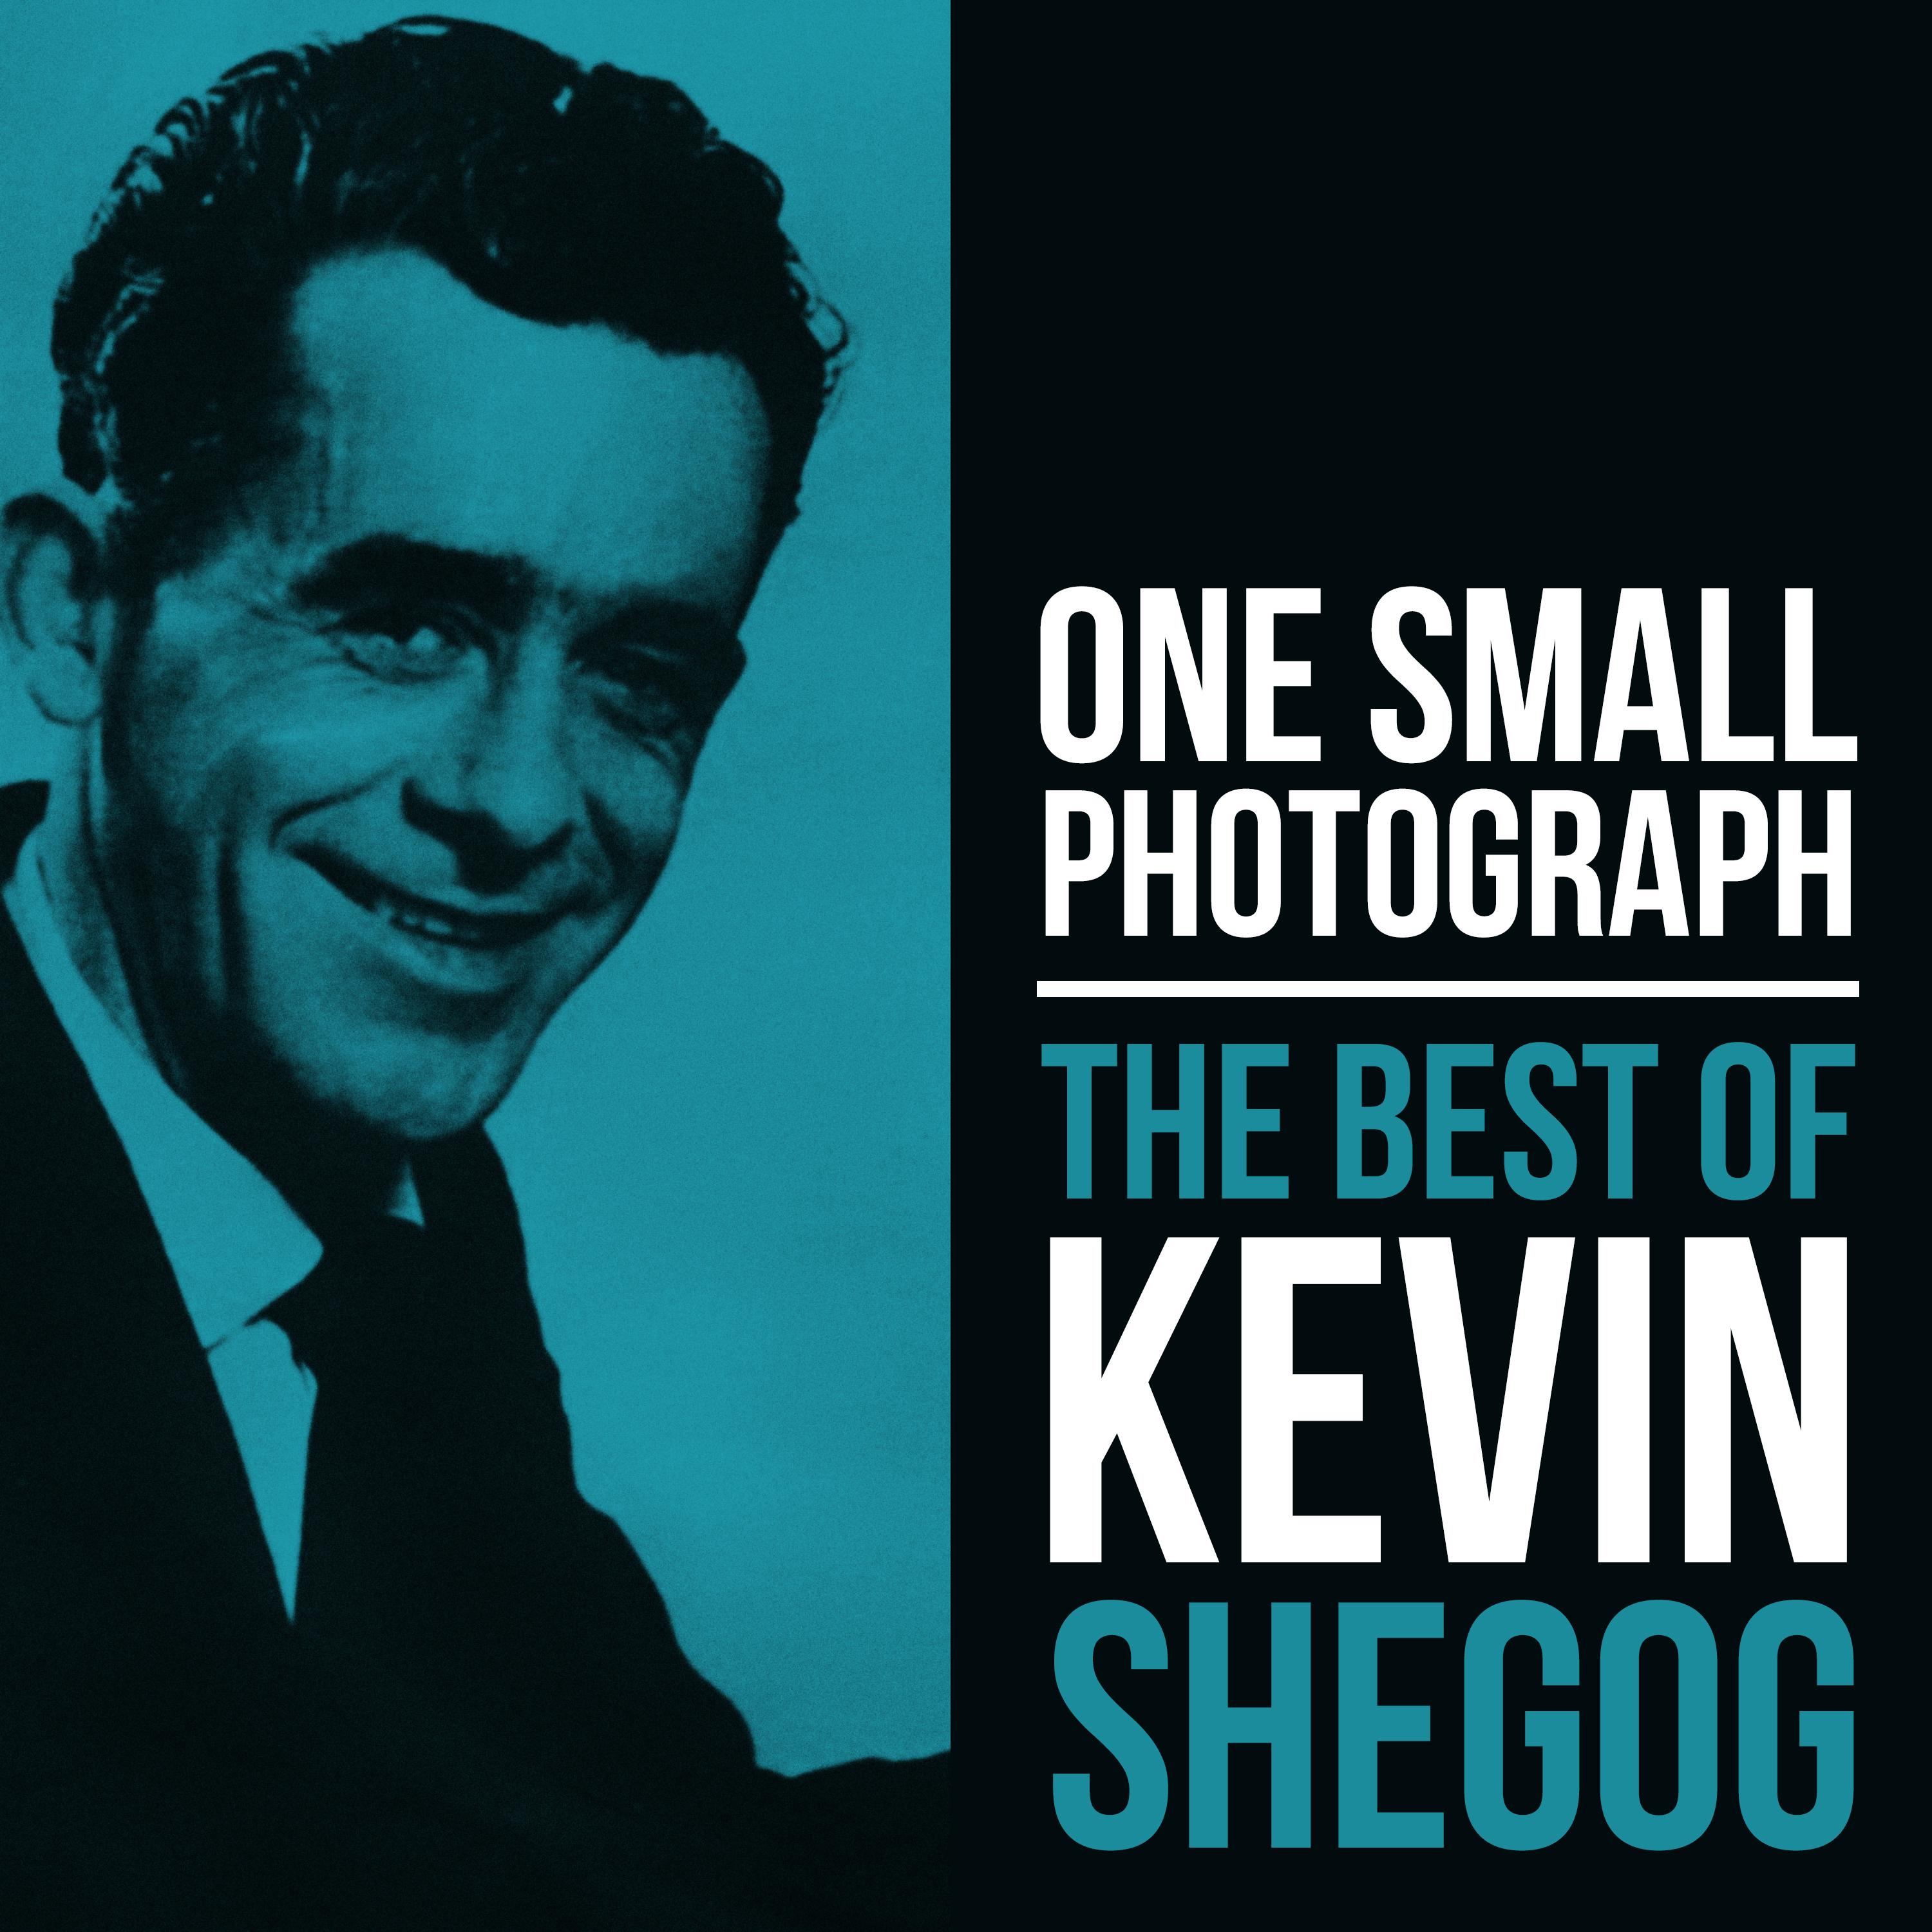 One Small Photograph - The Best Of Kevin Shegog